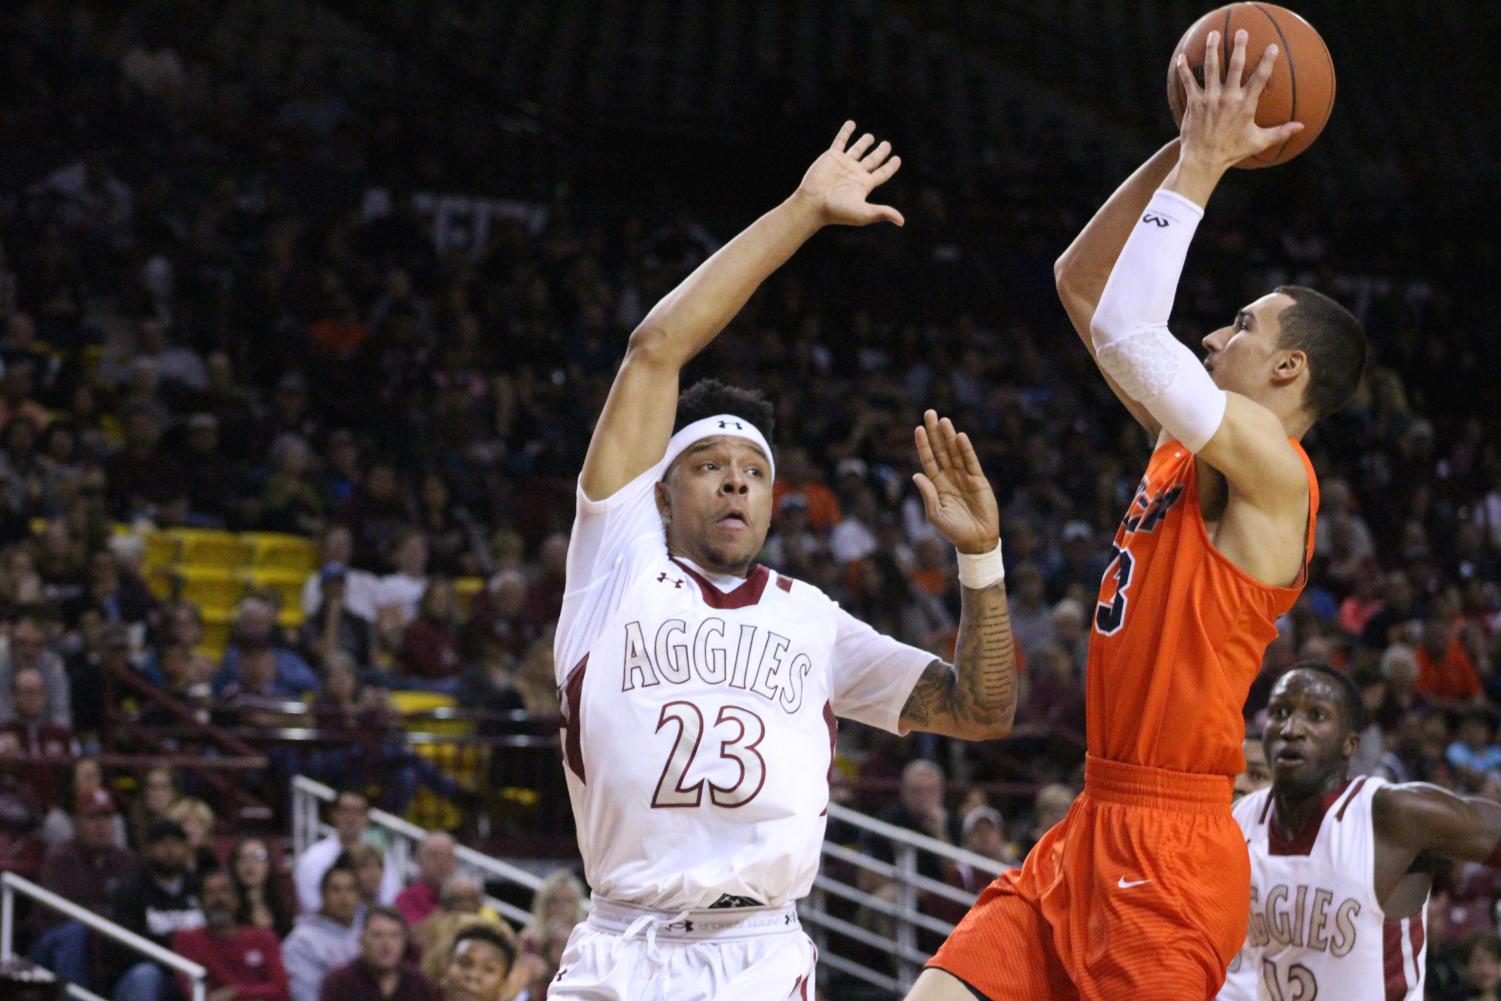 Miners+drop+fourth+straight+in+72-63+loss+to+NMSU